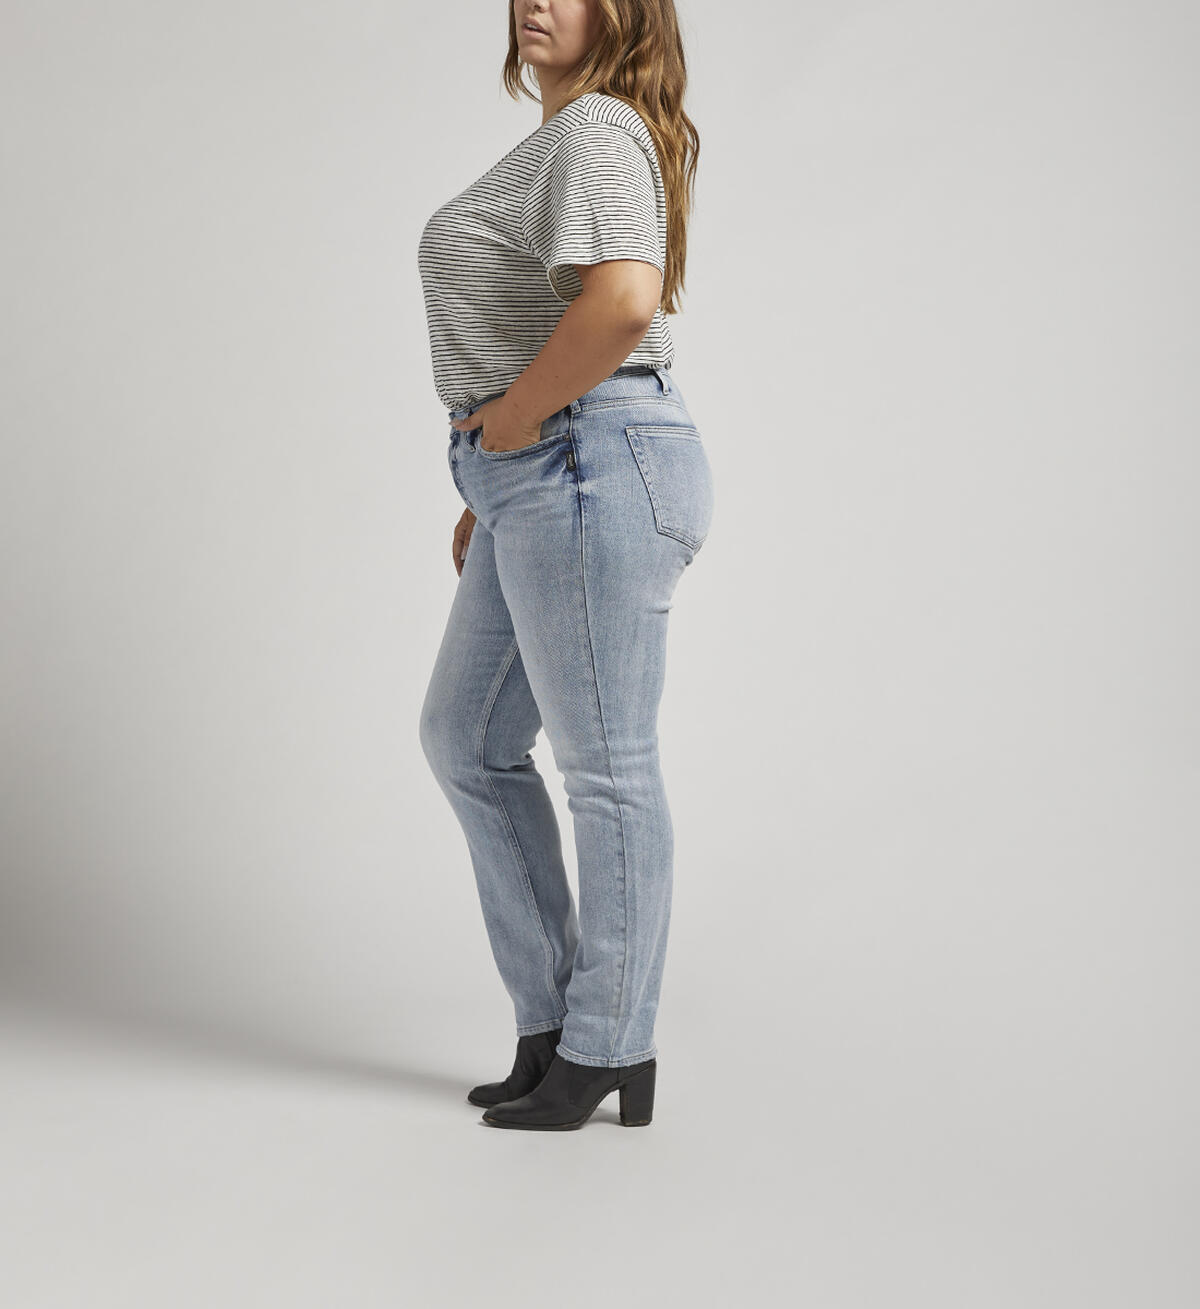 Most Wanted Mid Rise Straight Leg Jeans Plus Size, Indigo, hi-res image number 2